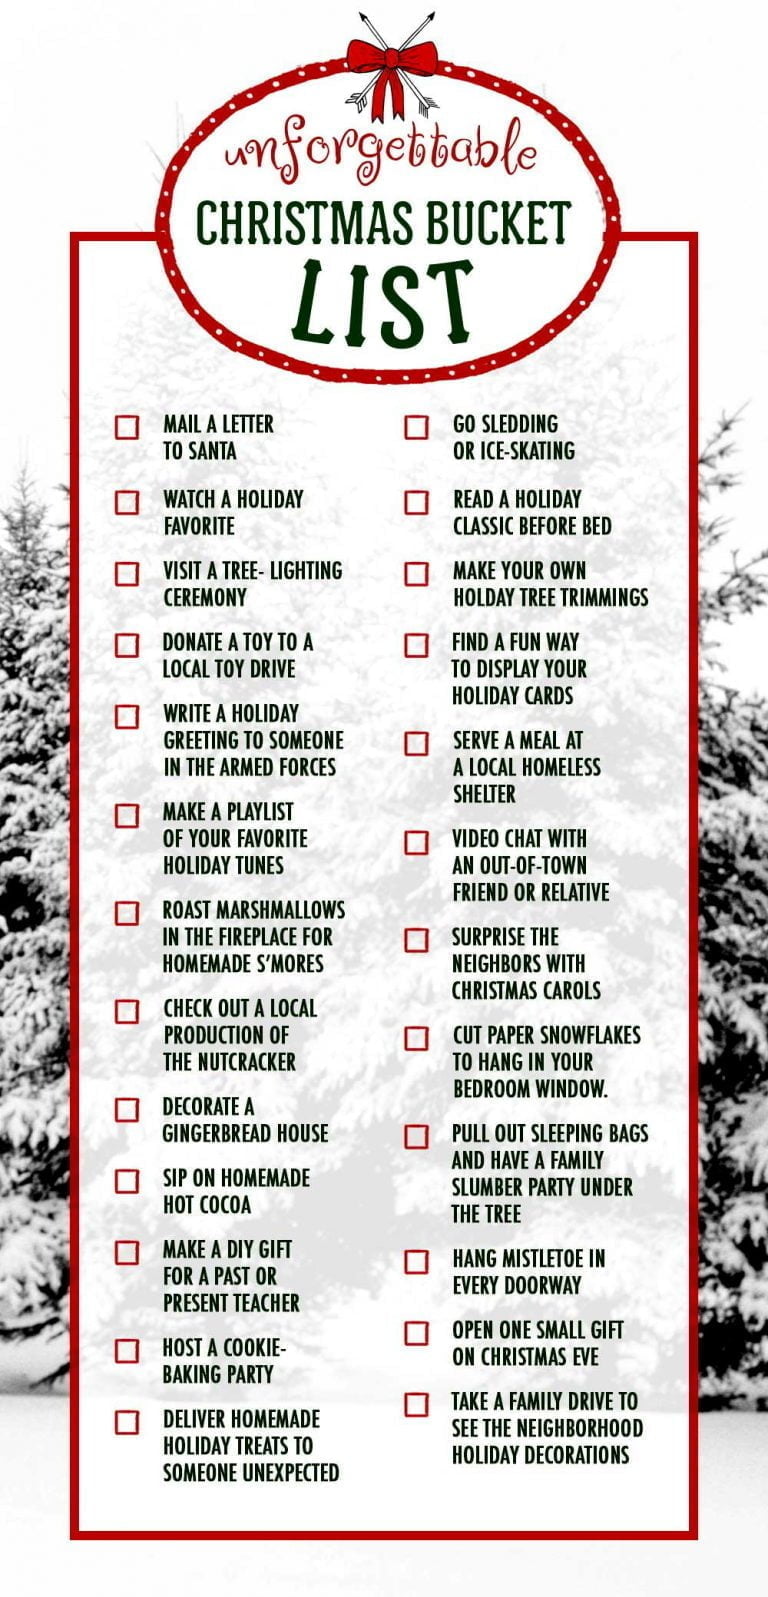 Experience The Best Holiday Ever. Christmas Bucket List for Everyone